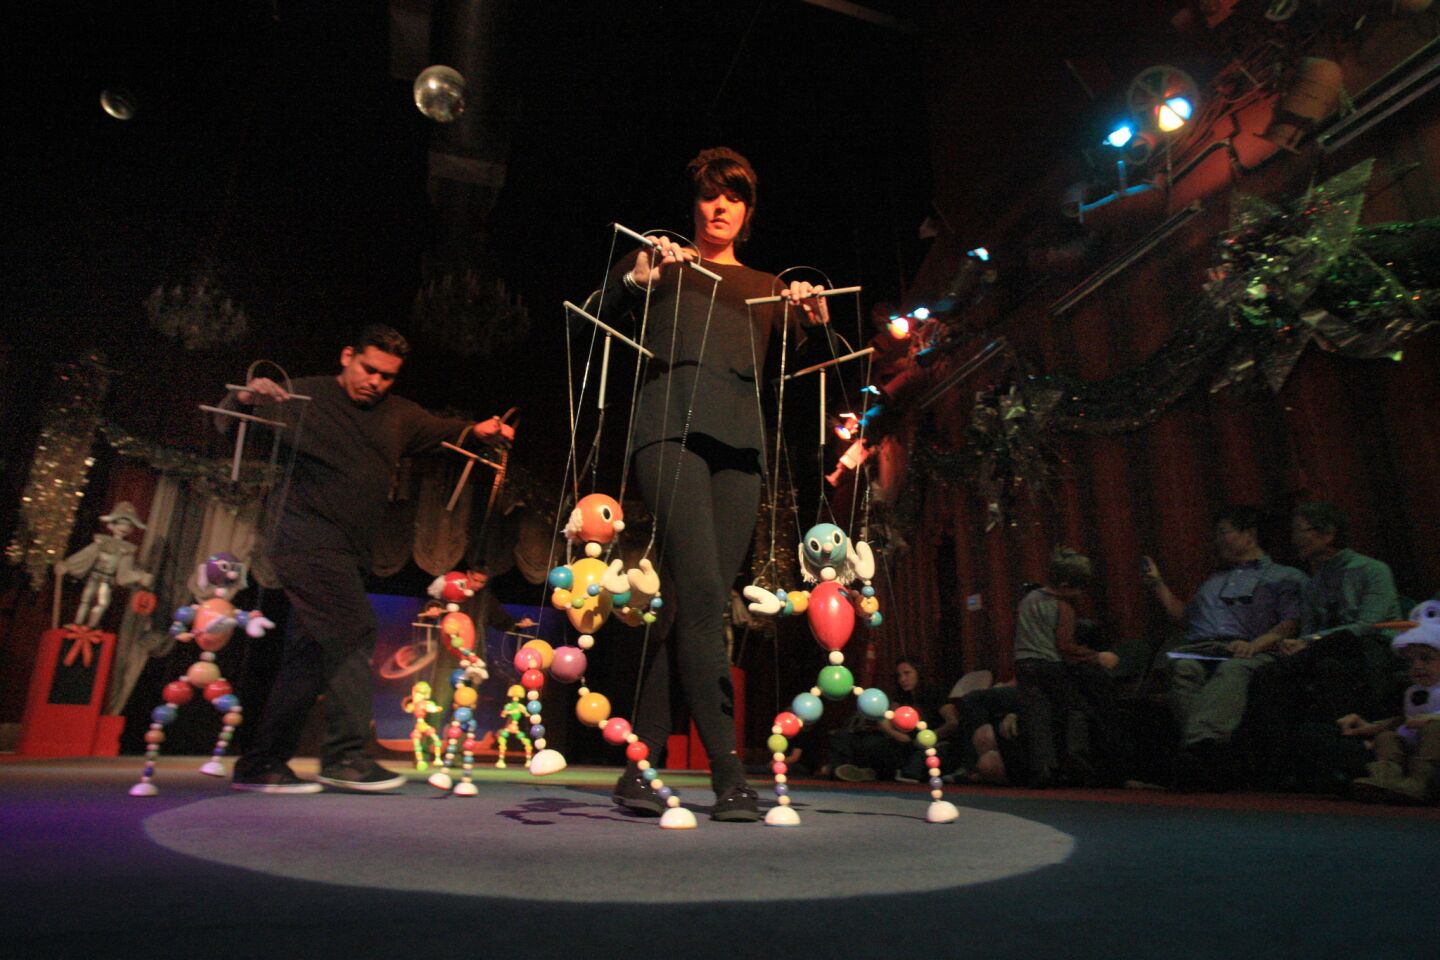 Marionette theater